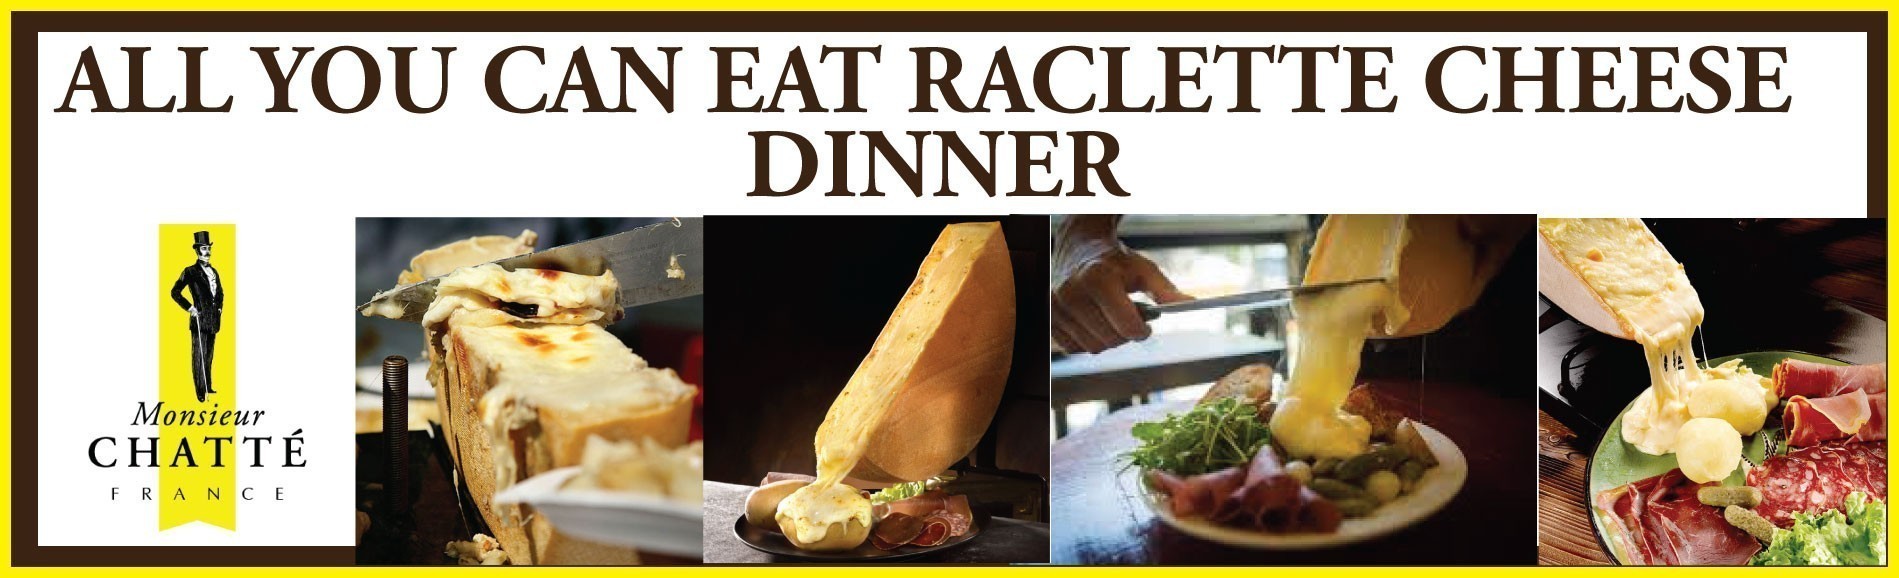 All You Can Eat Raclette Dinners